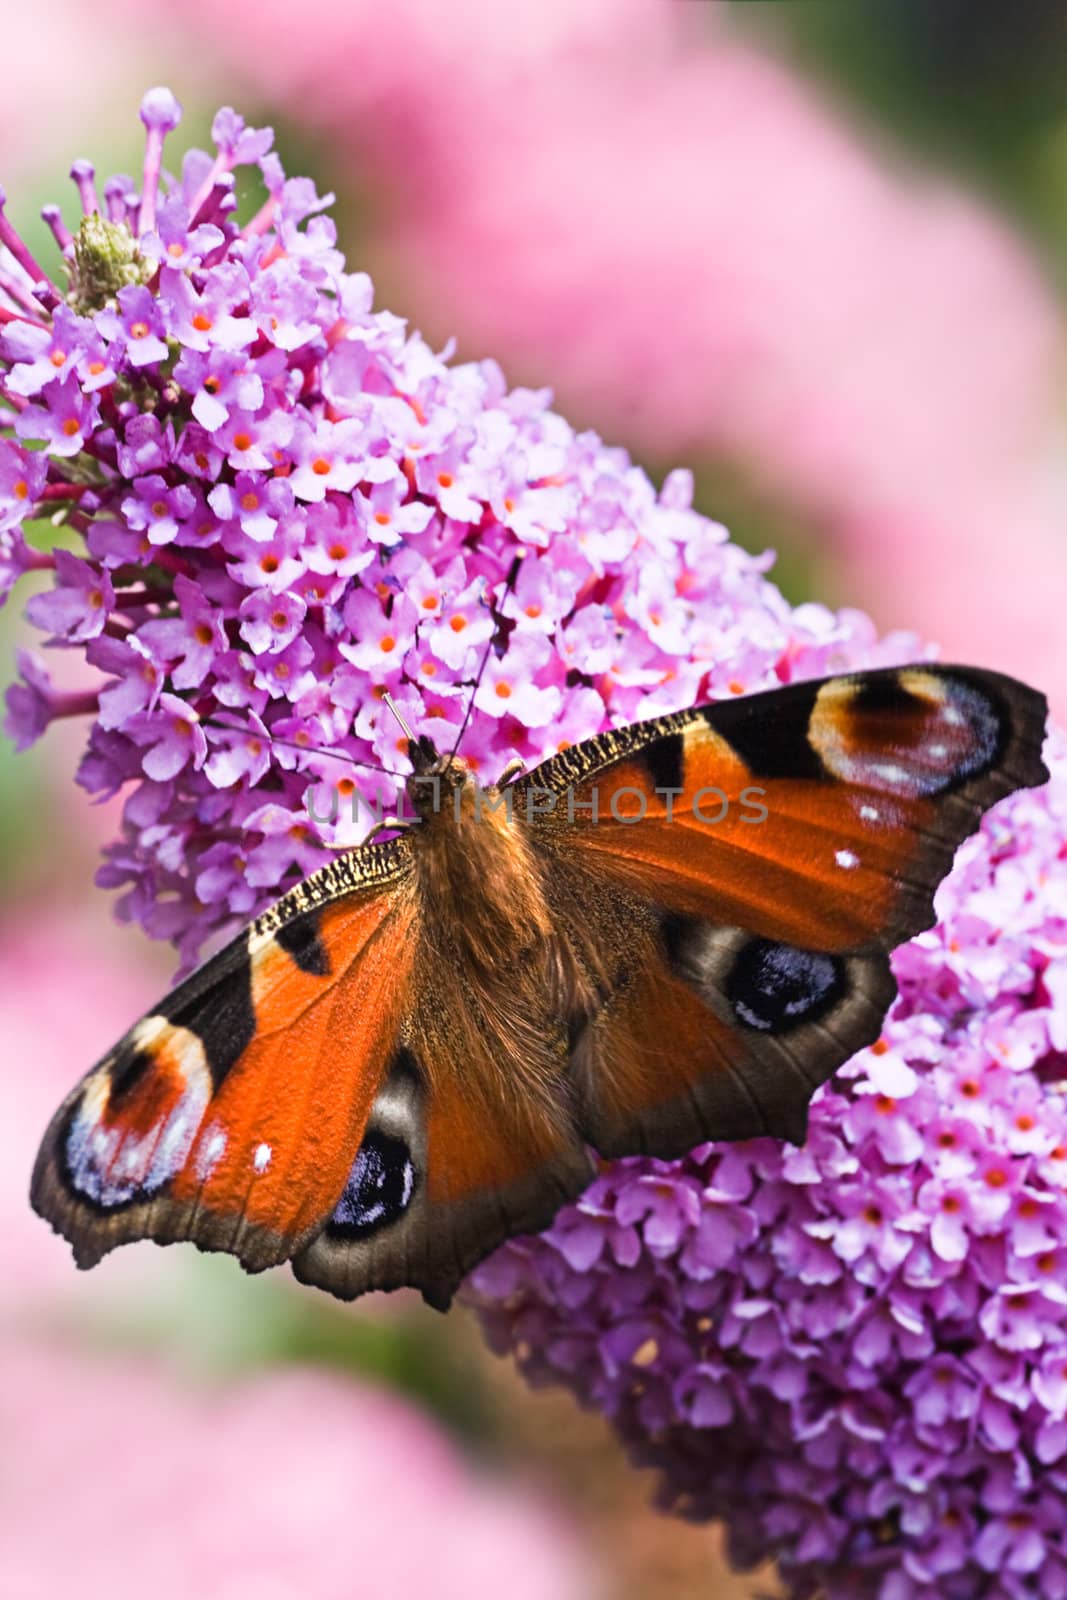 Peacock butterfly on pink flowers by Colette